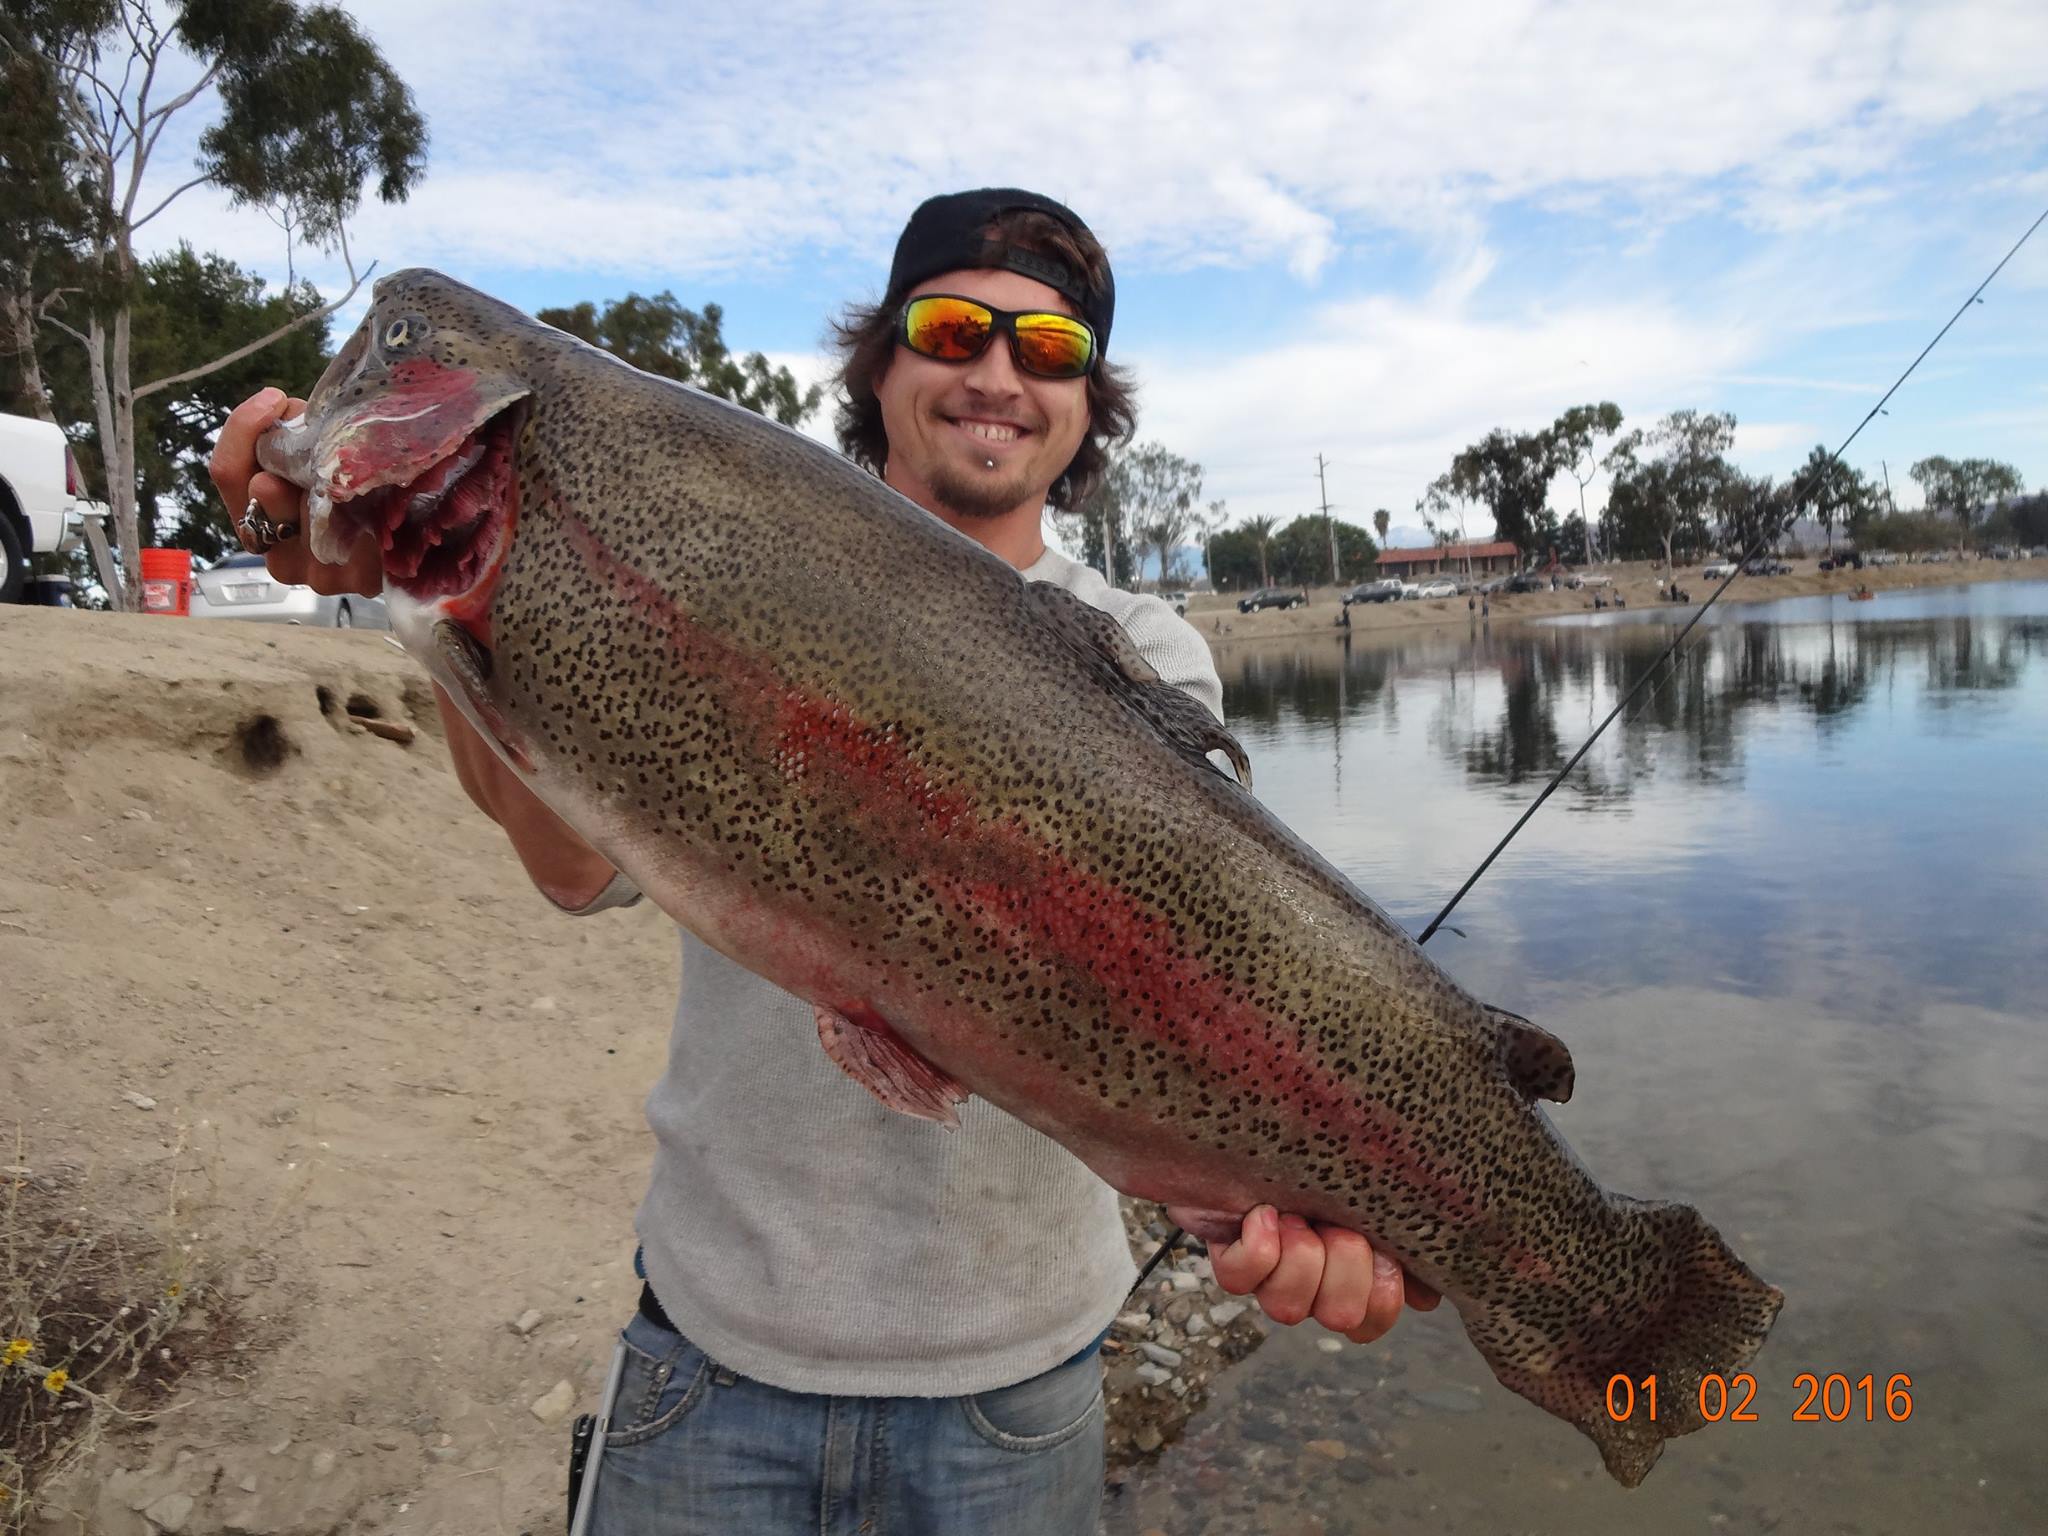 https://www.fishinglakes.com/wp-content/uploads/2016/01/Tim-ODonnell-of-Fullerton-caught-a-16-pound-8-ounce-trout-using-garlic-PowerBait-fishing-in-the-Big-Lake-near-the-Pump-House.jpg